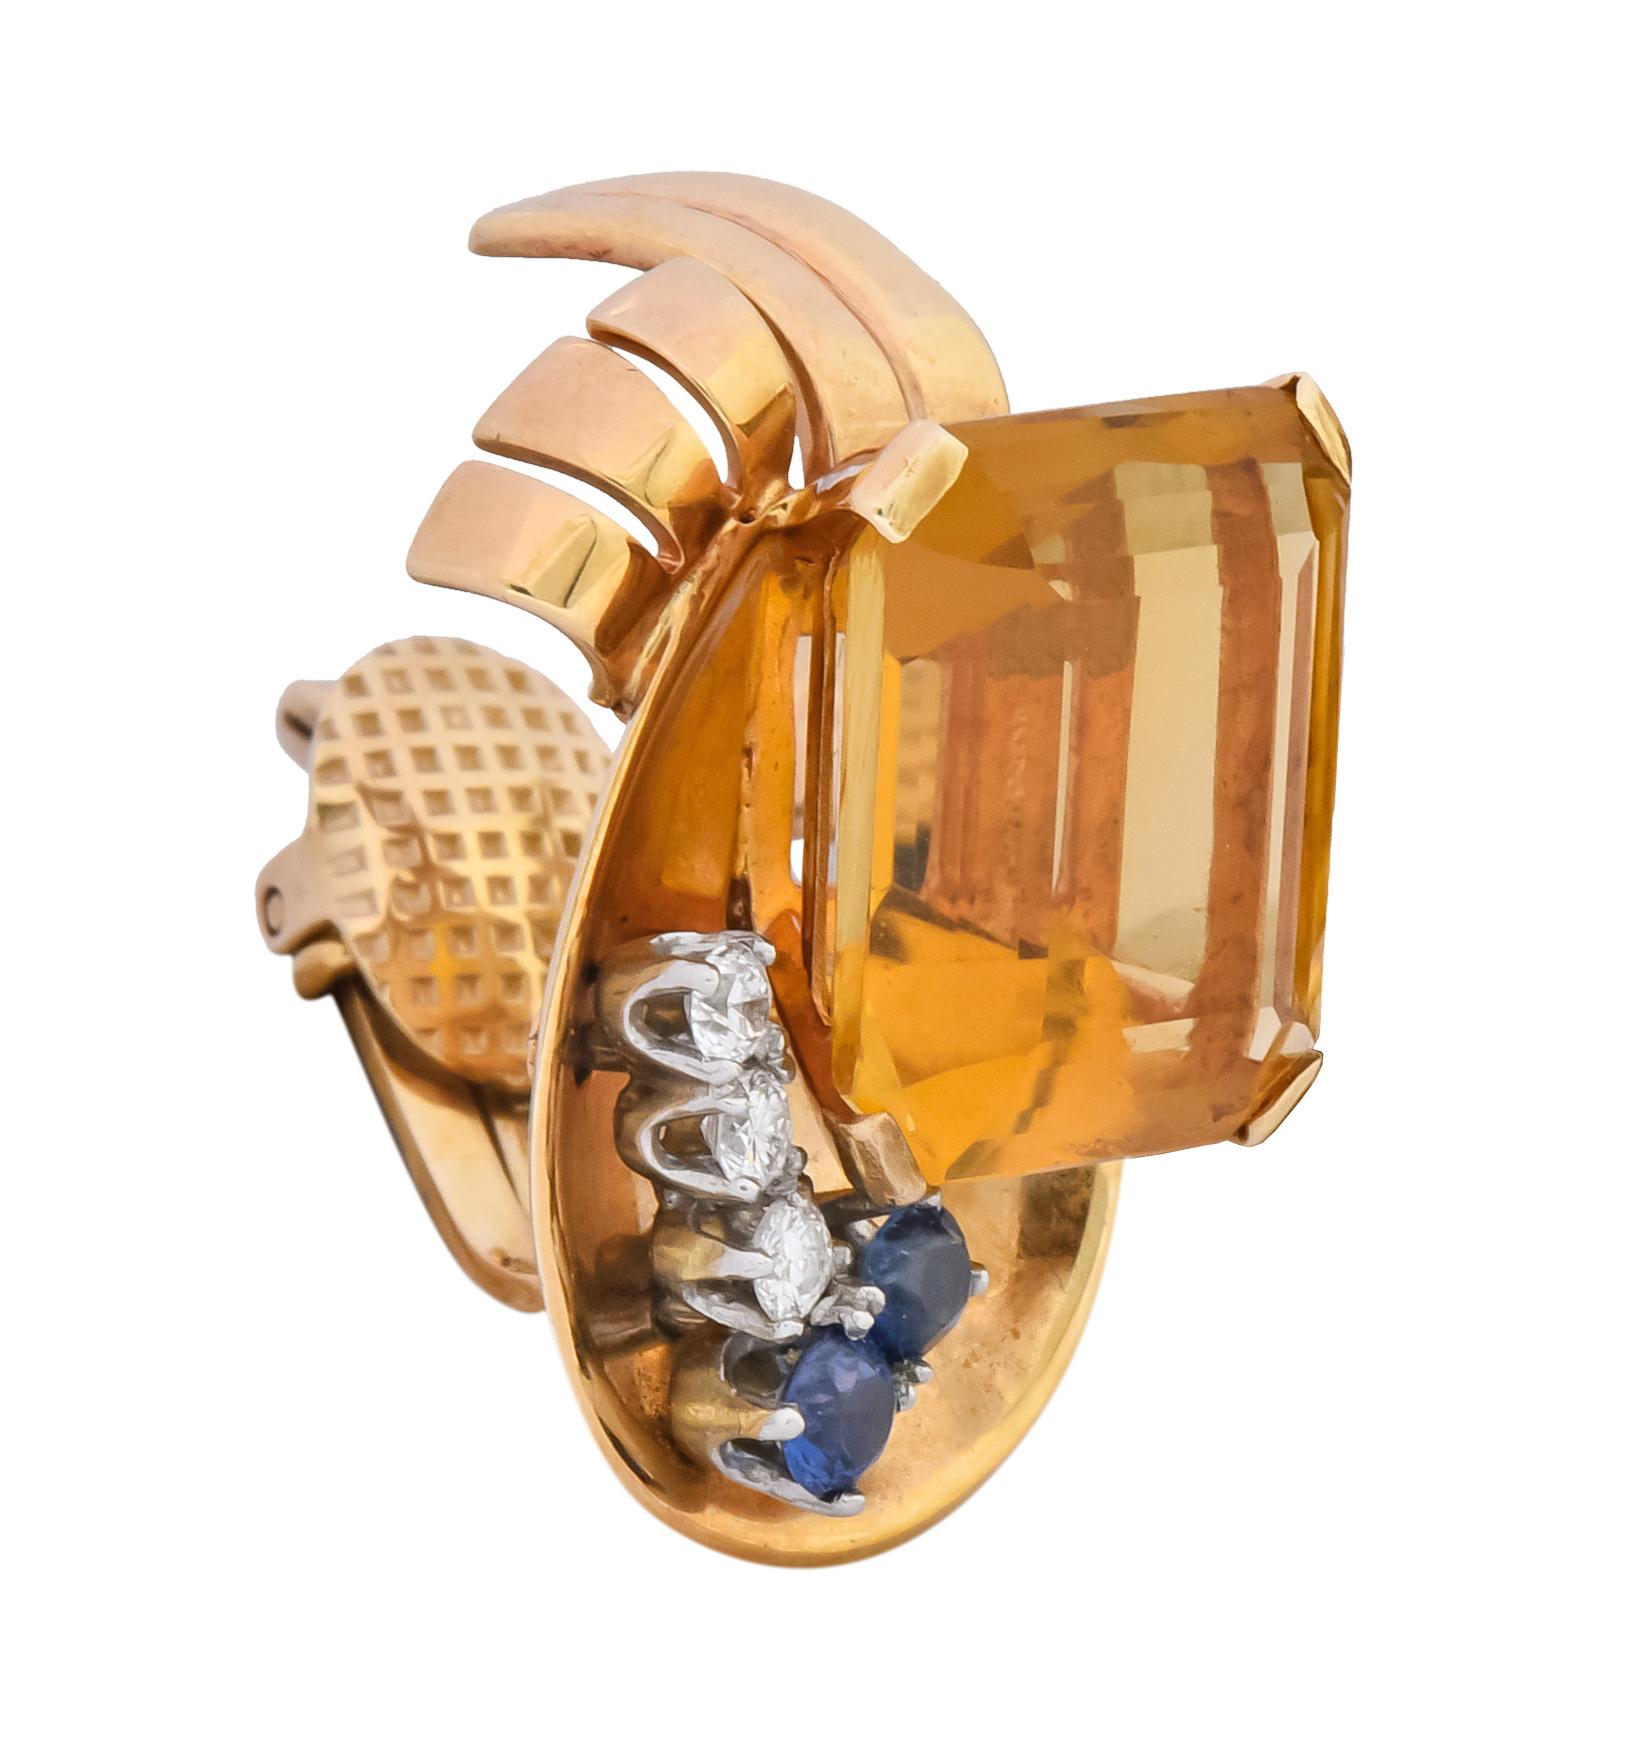 Each earring centers a rectangular step cut citrine weighing 28.48 total carats, transparent and honey colored

Accented by round brilliant cut diamonds and round cut sapphires weighing approximately 0.78 carat total, diamonds eye-clean/white and